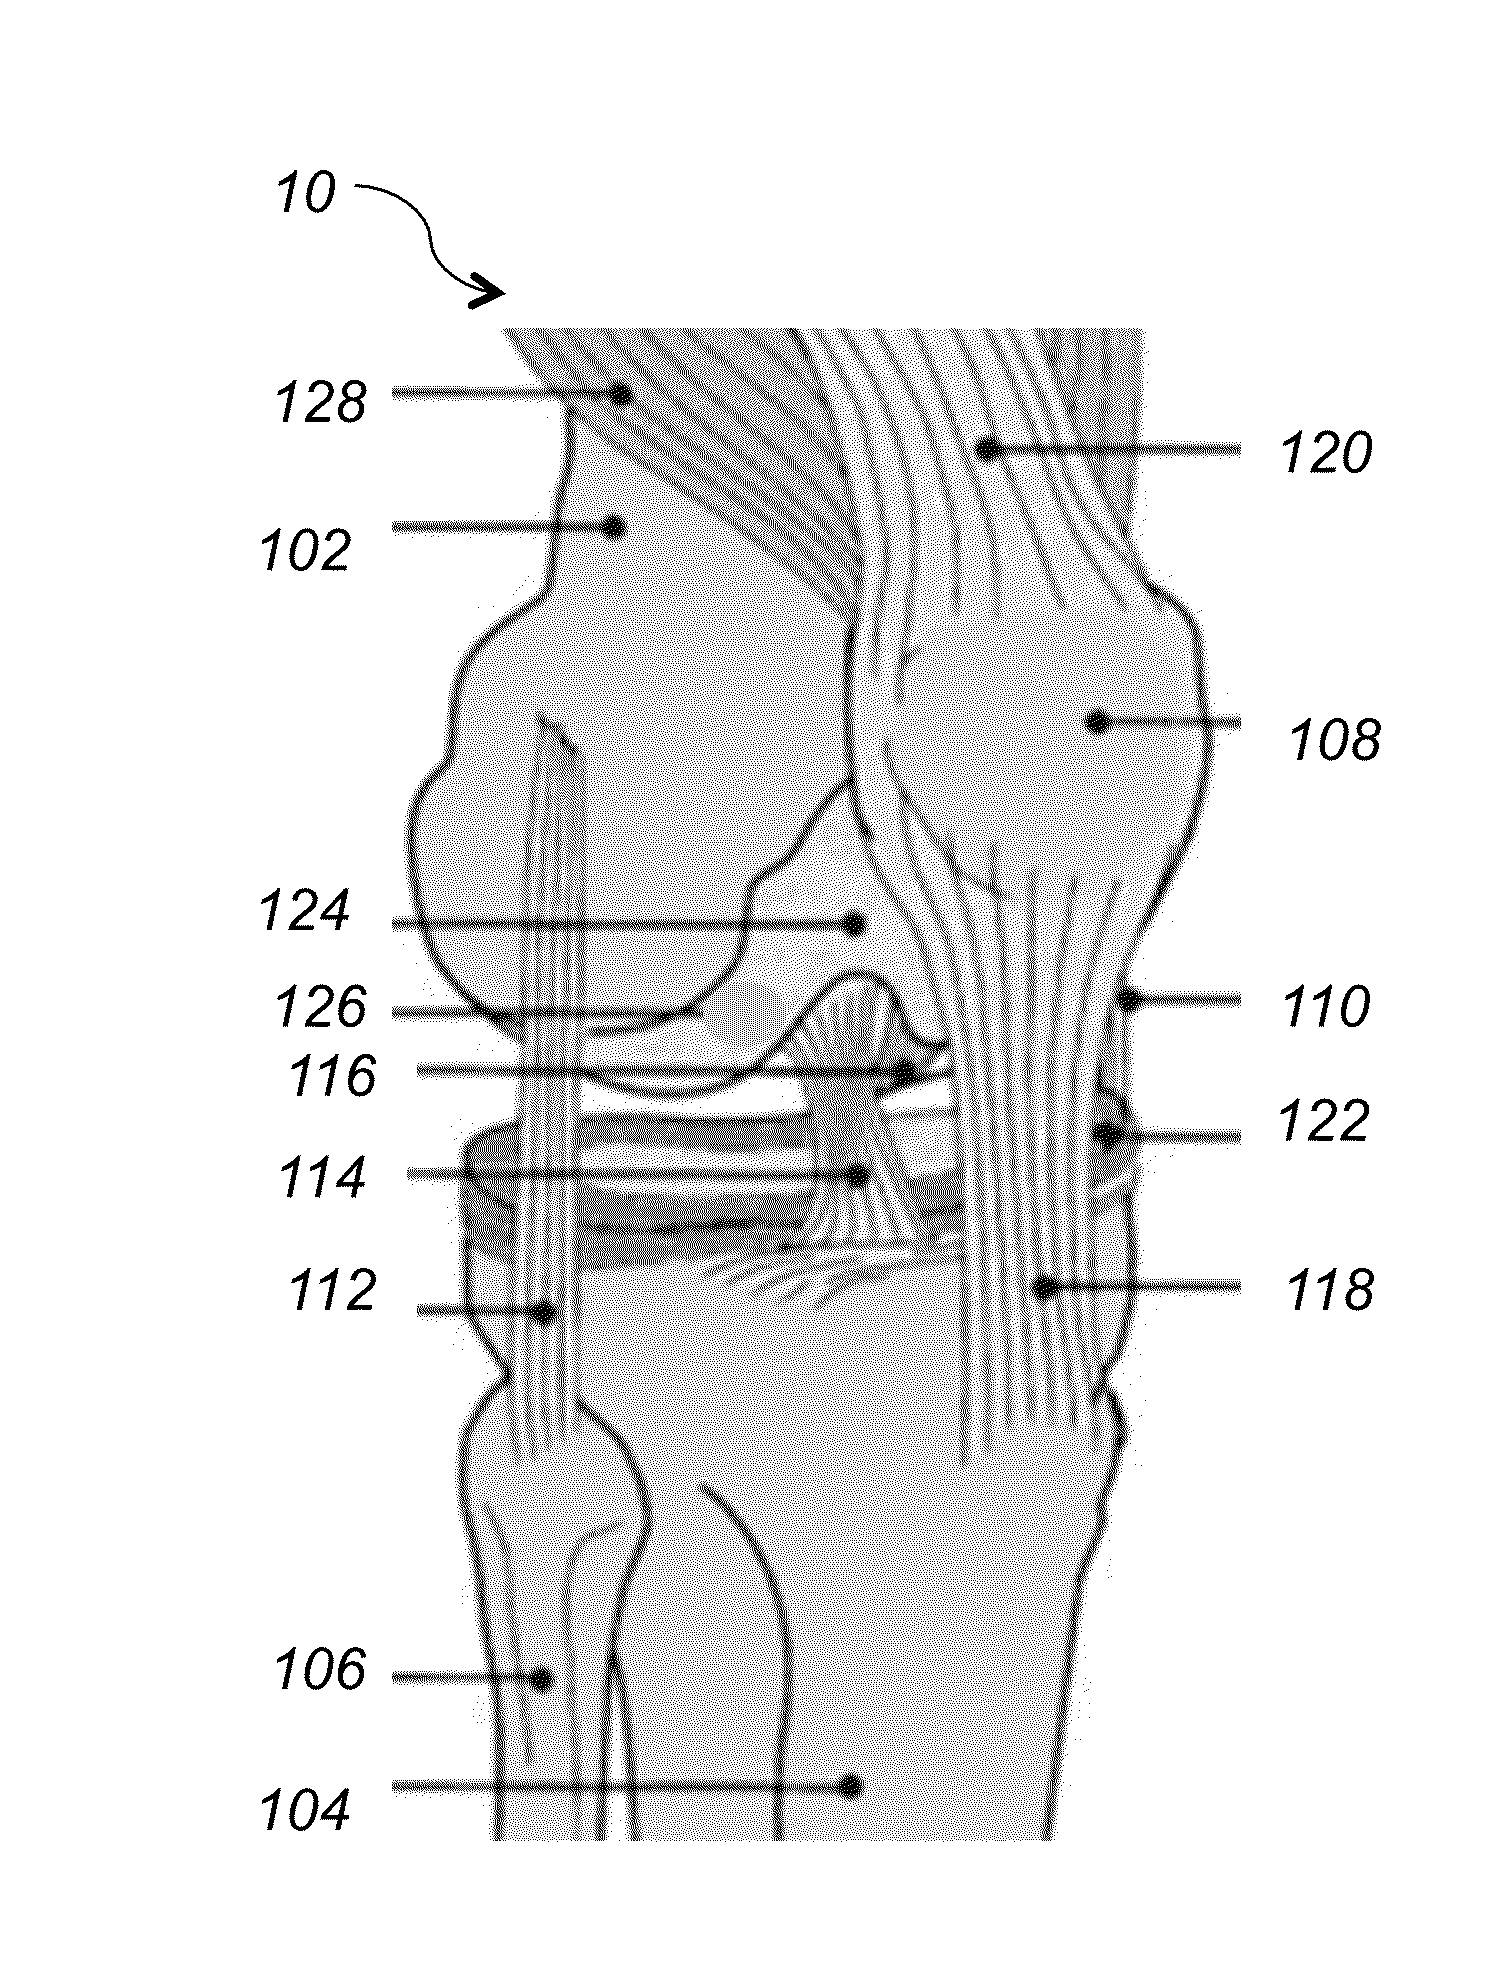 System and method for ligament insertion in knee joint surgeries using adaptive migration of ligament insertion geometry